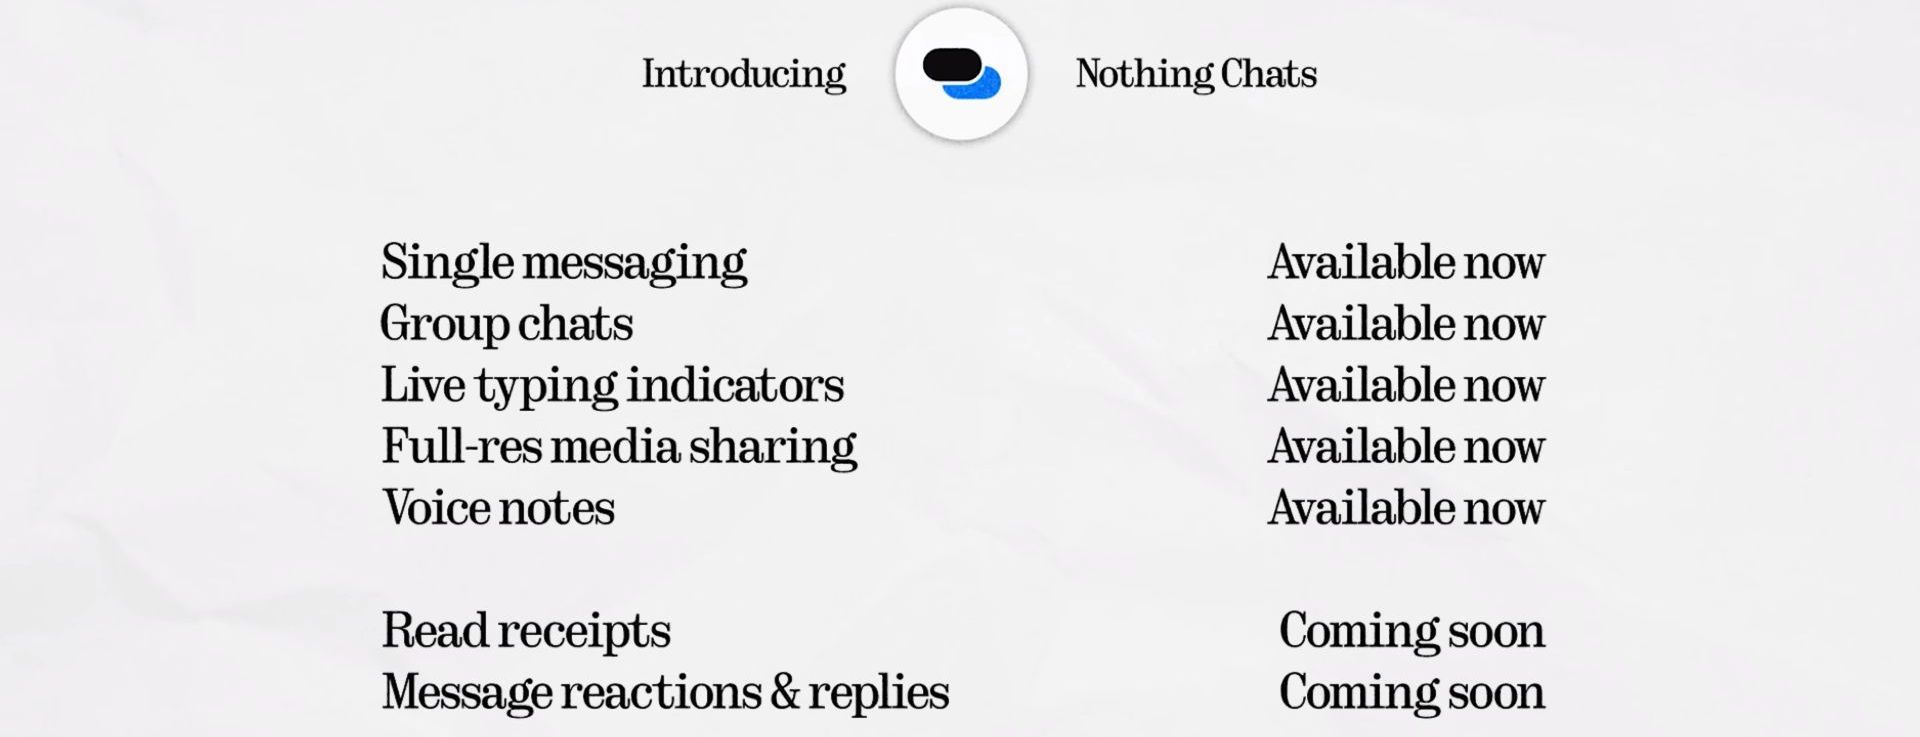 Nothing Chats app